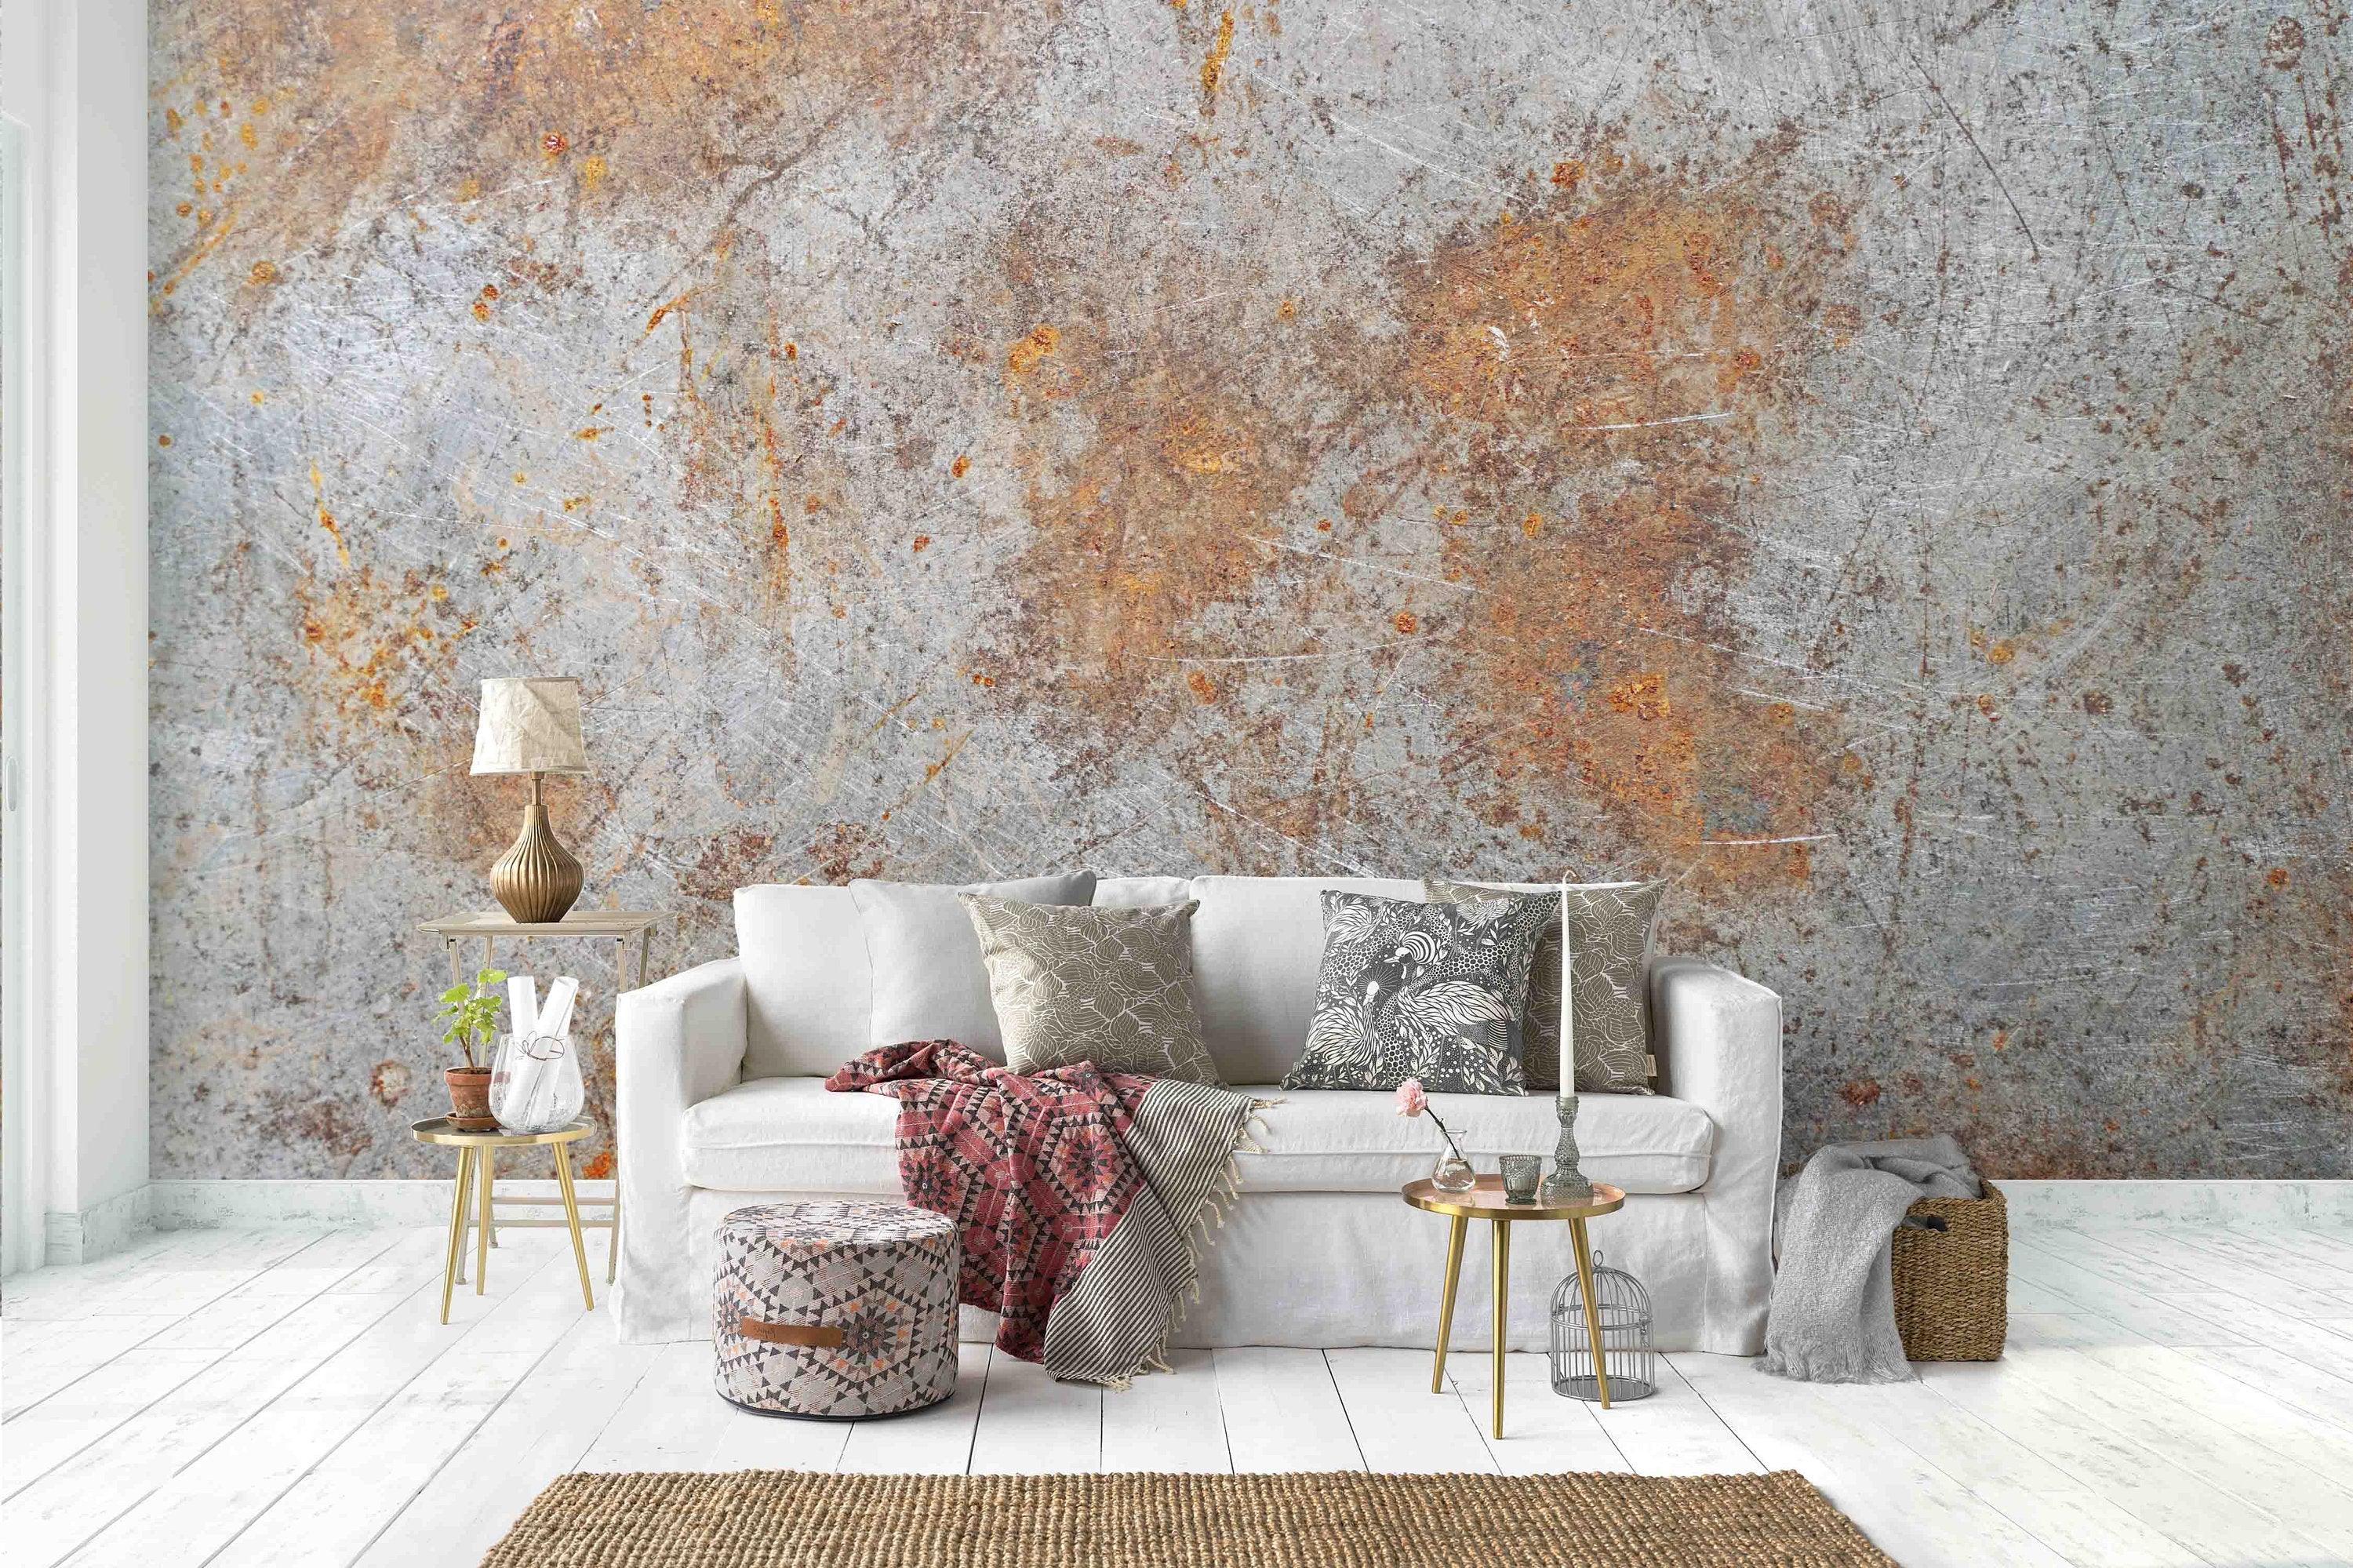 3D Decay texture, Rusted, Old iron and steel background Wallpaper,Removable Self Adhesive Wallpaper,Wall Mural,Vintage art,Peel and Stick- Jess Art Decoration